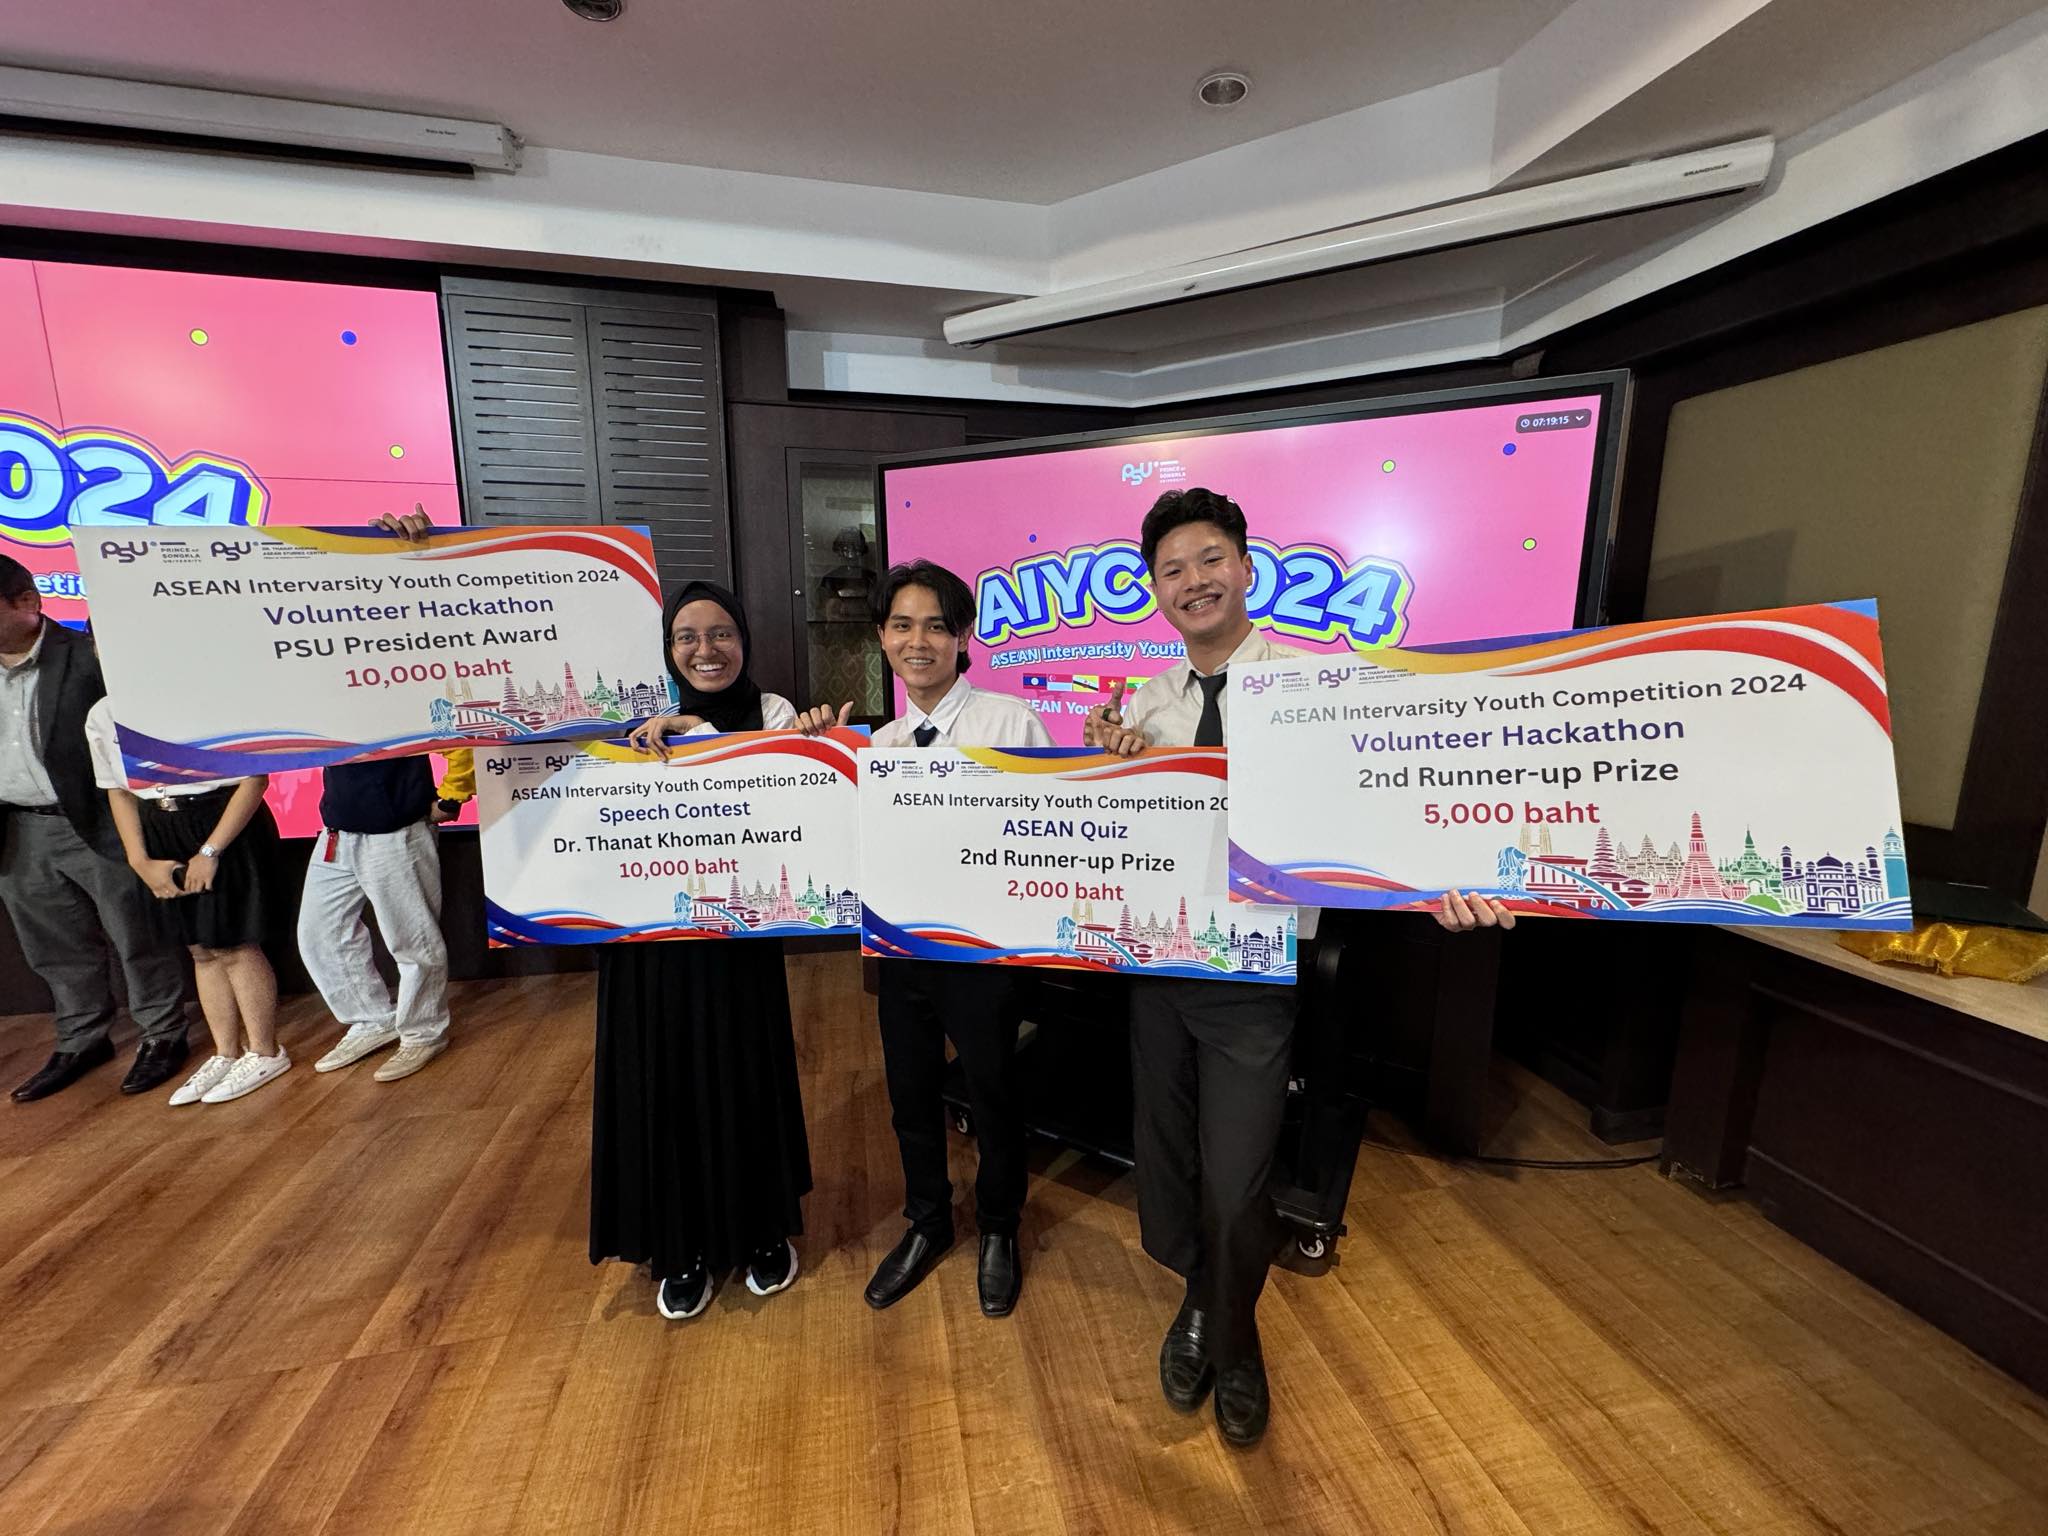 MFU Students Shine at ASEAN Intervarsity Youth Competition: Top Awards in Speech, Quiz, and Hackathon